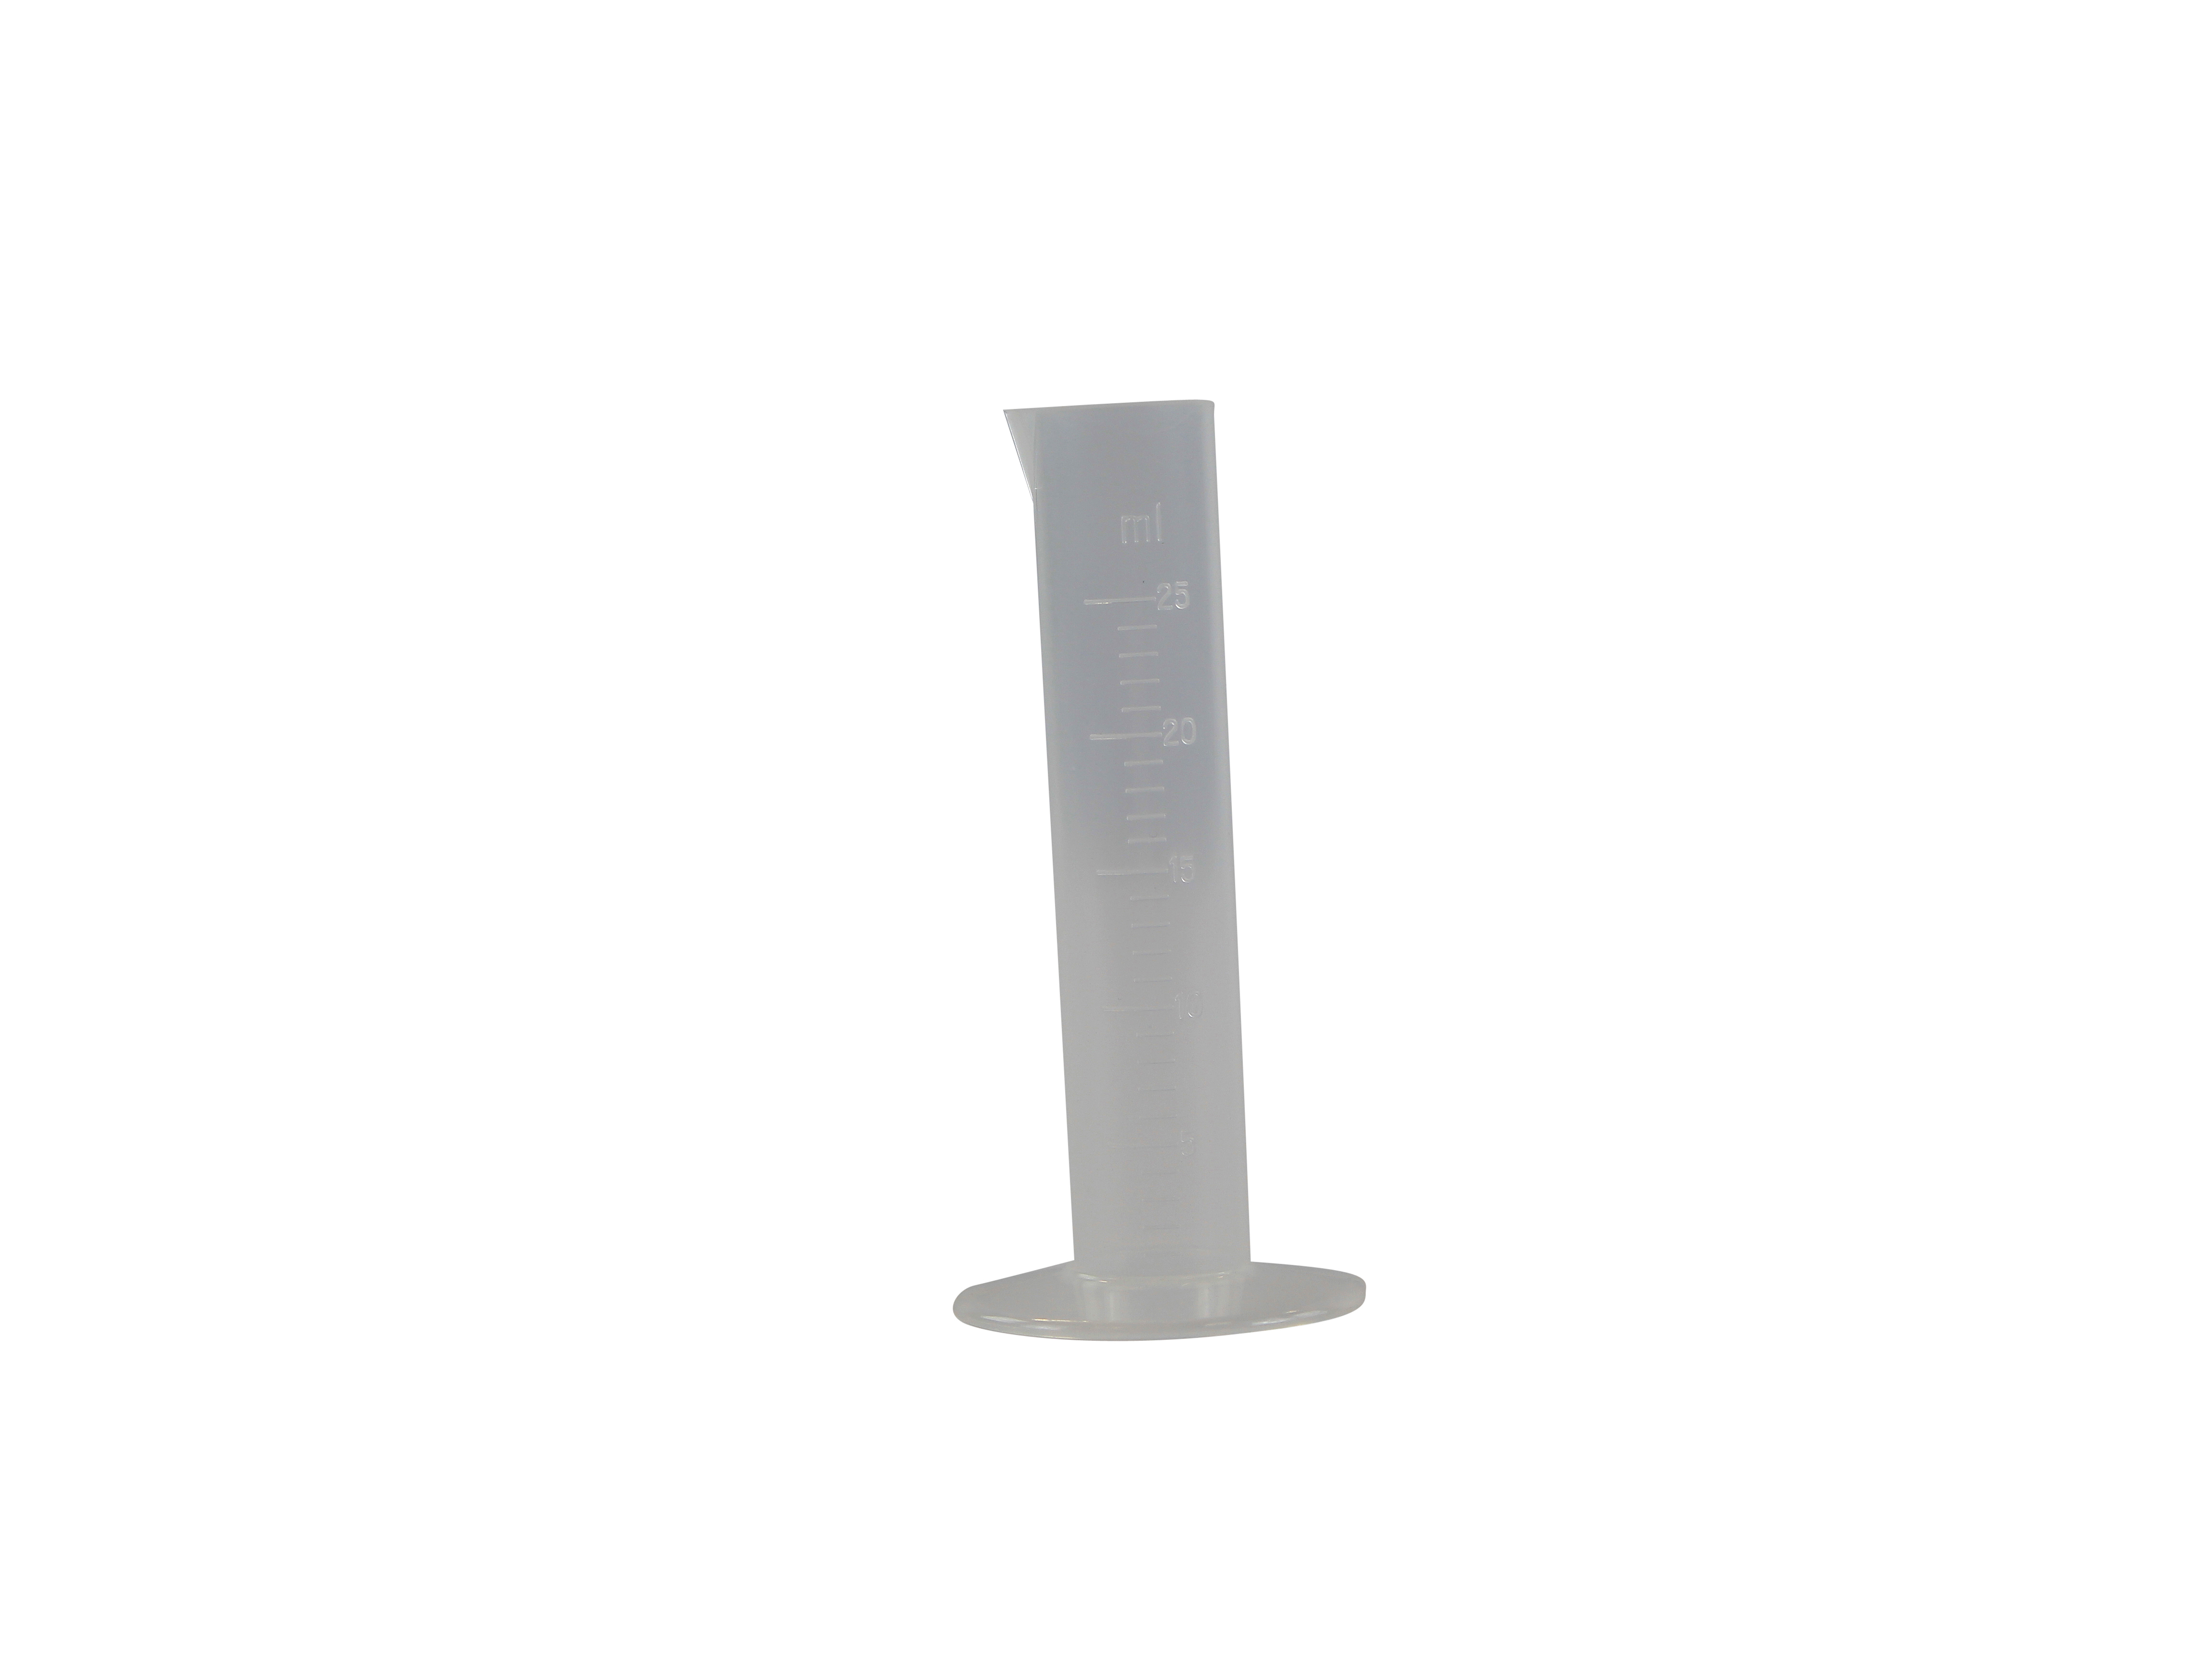 Measuring cylinder 25 ml - different sizes available